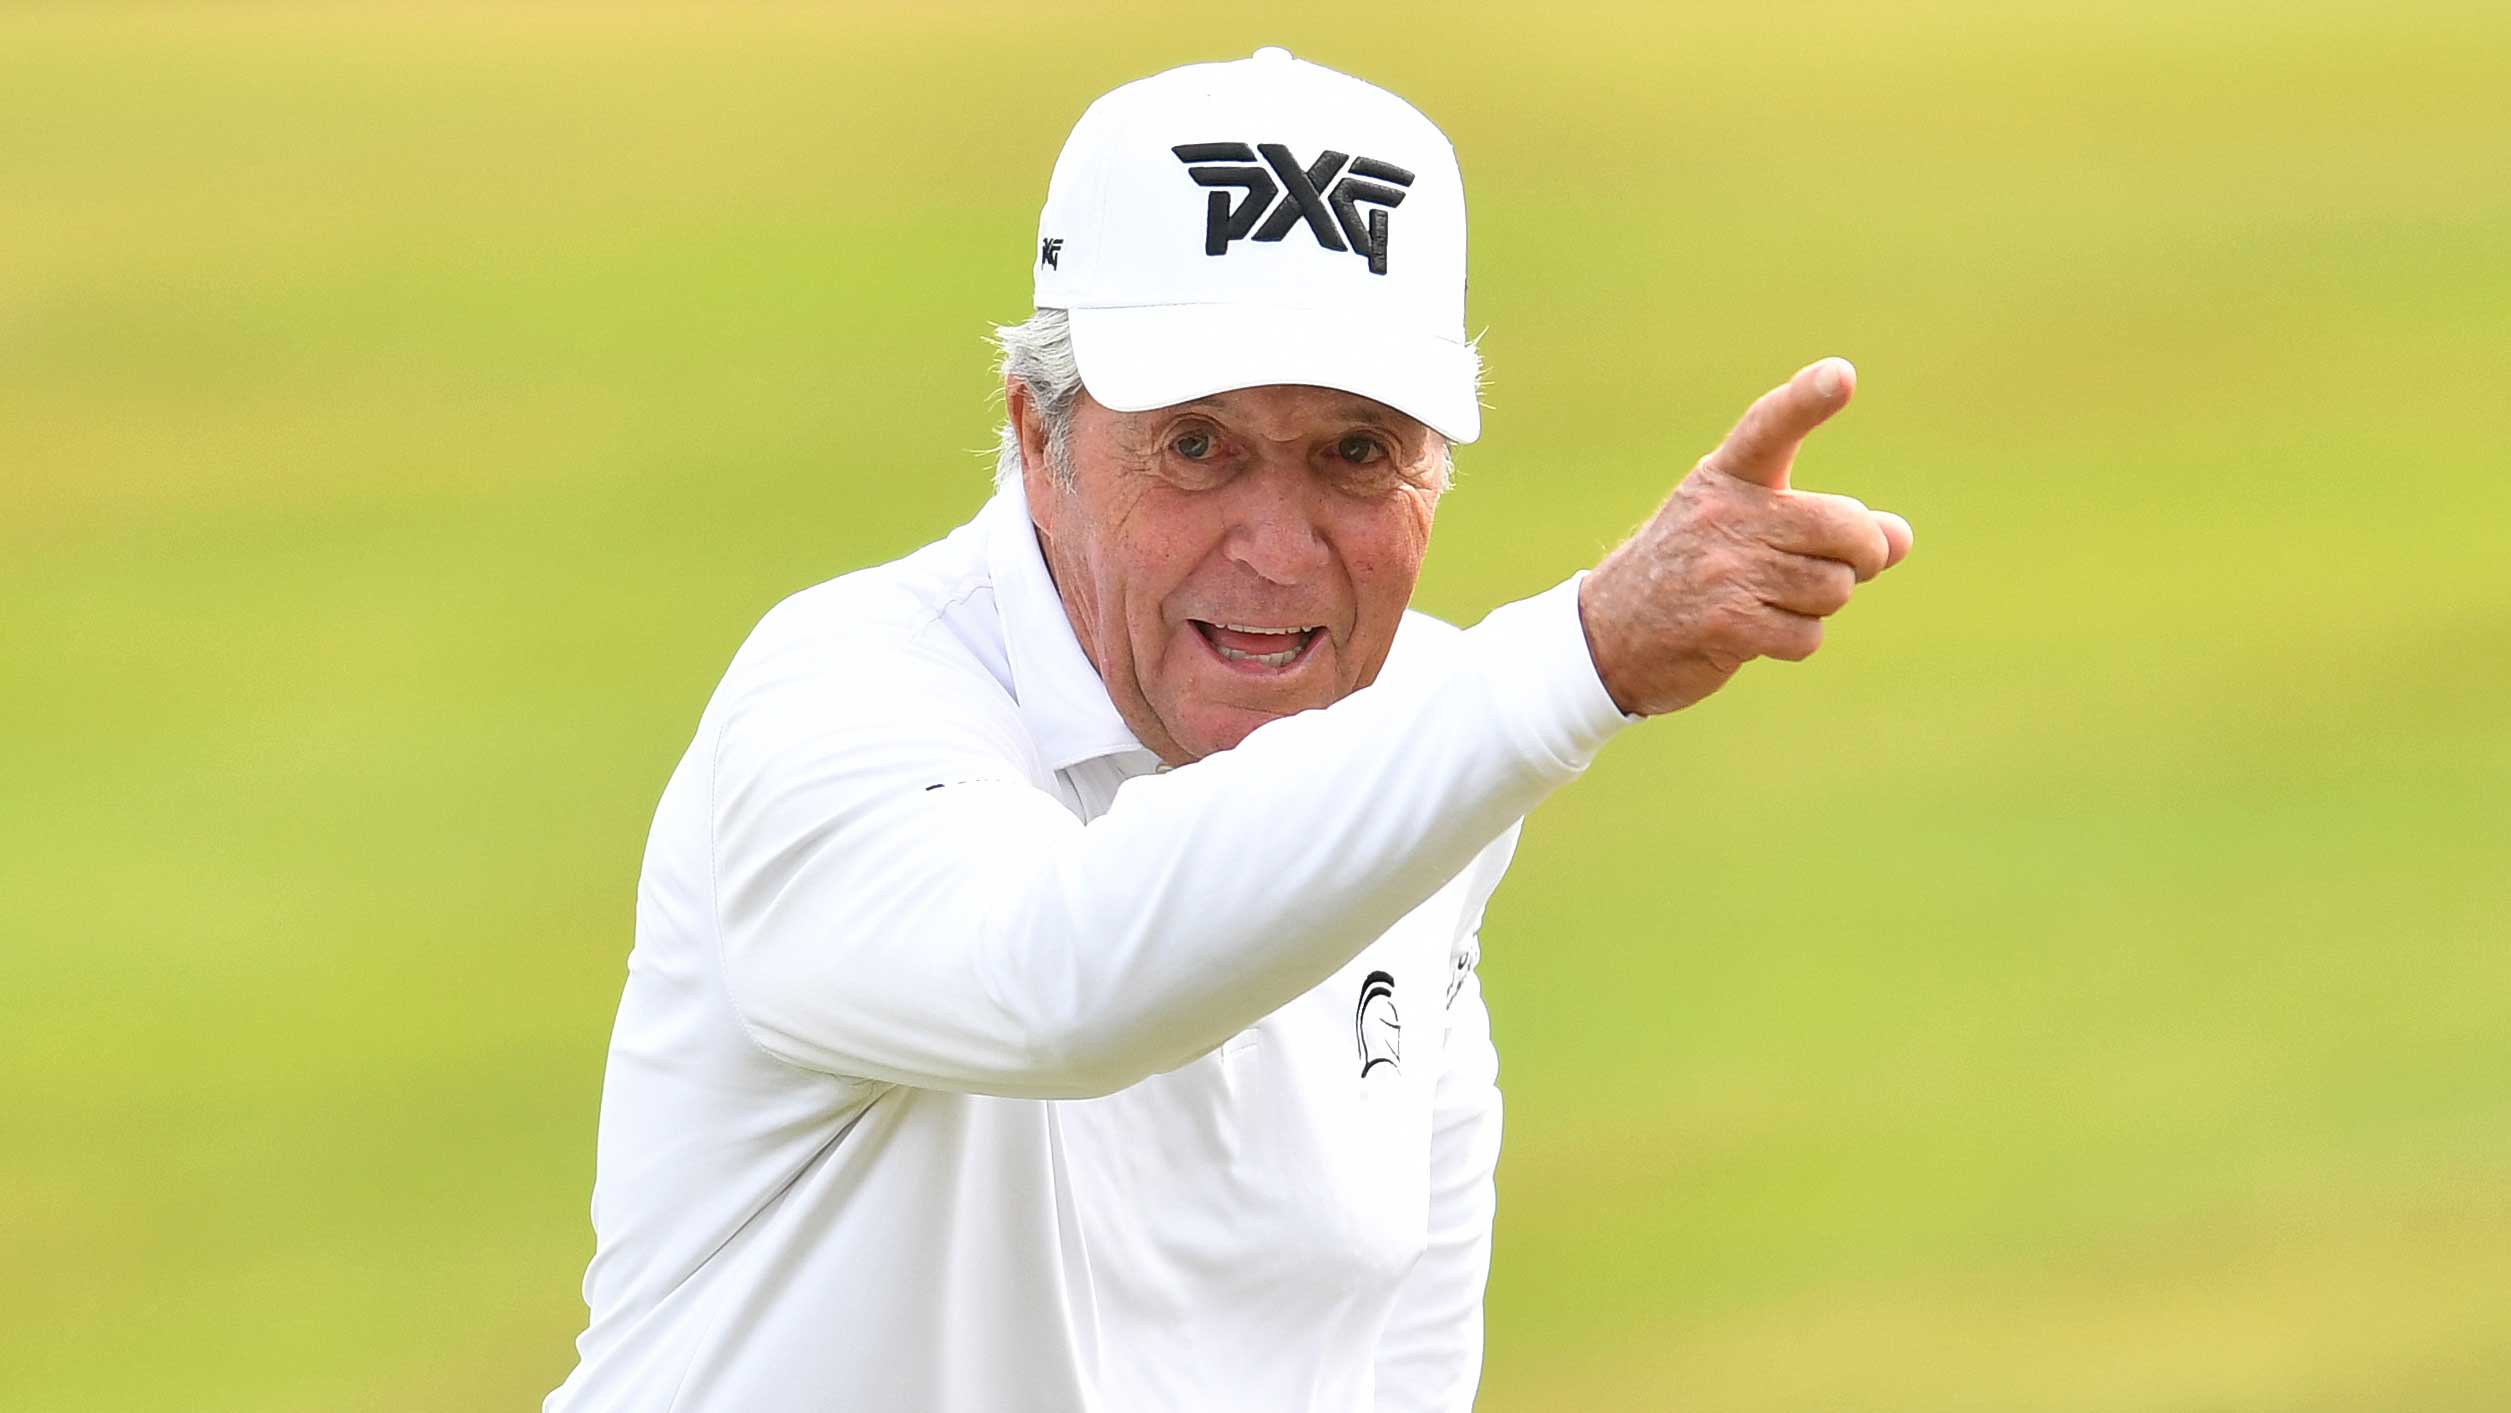 Gary Player of Republic of South Africa gestures at the 3rd green prior to The Senior Open Presented by Rolex at The King's Course on July 19, 2022 in Gleneagles, United Kingdom